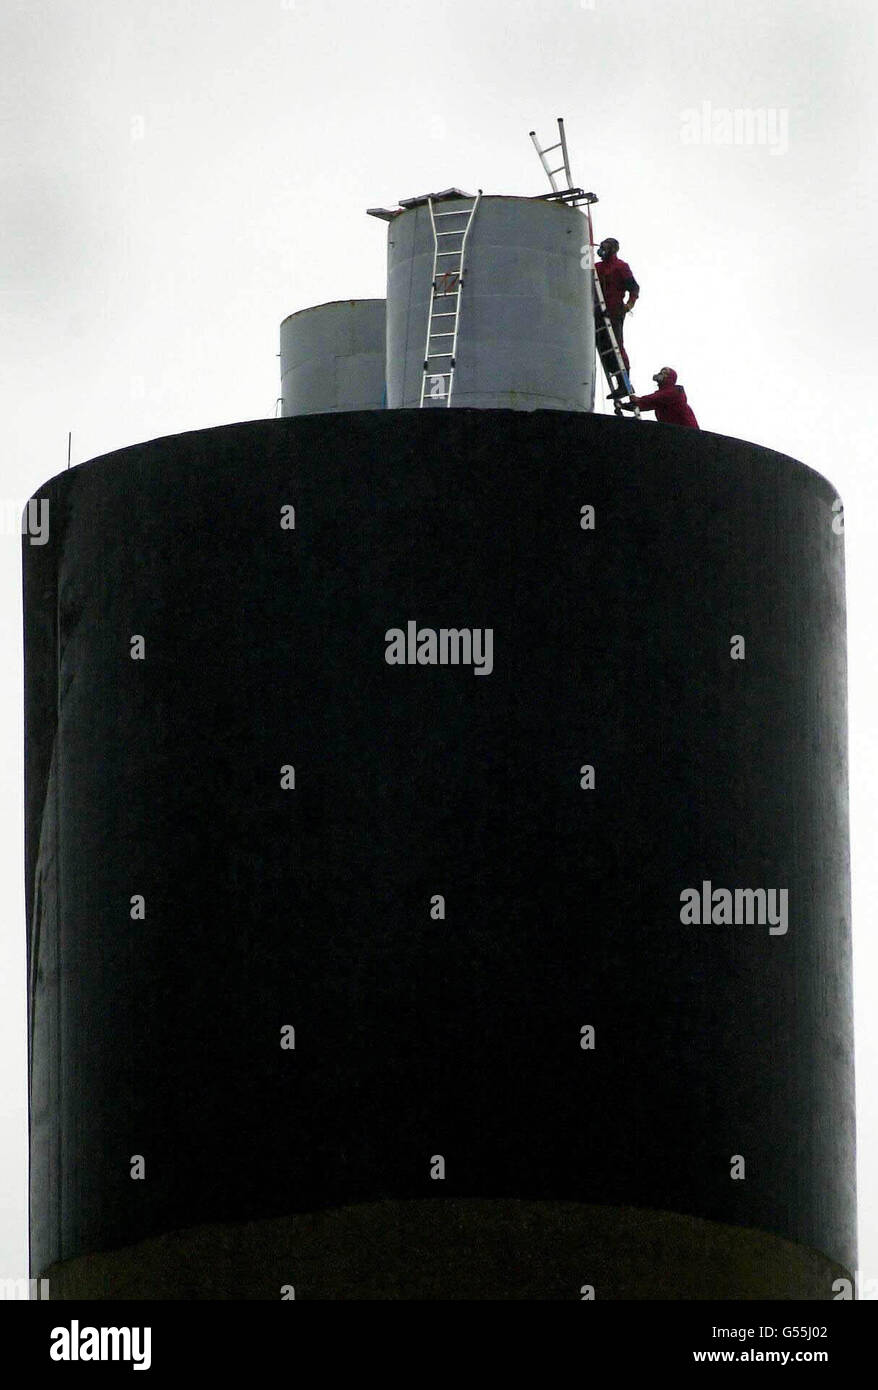 Activists from environment group Greenpeace who partially closed off one of the two 100 metre high exhaust chimneys at Britain's largest waste incinerator plant in Edmonton, north London, in protest over alleged toxic emissions. *The plant was forced to close after deliveries of refuse were blocked by protestors. Stock Photo